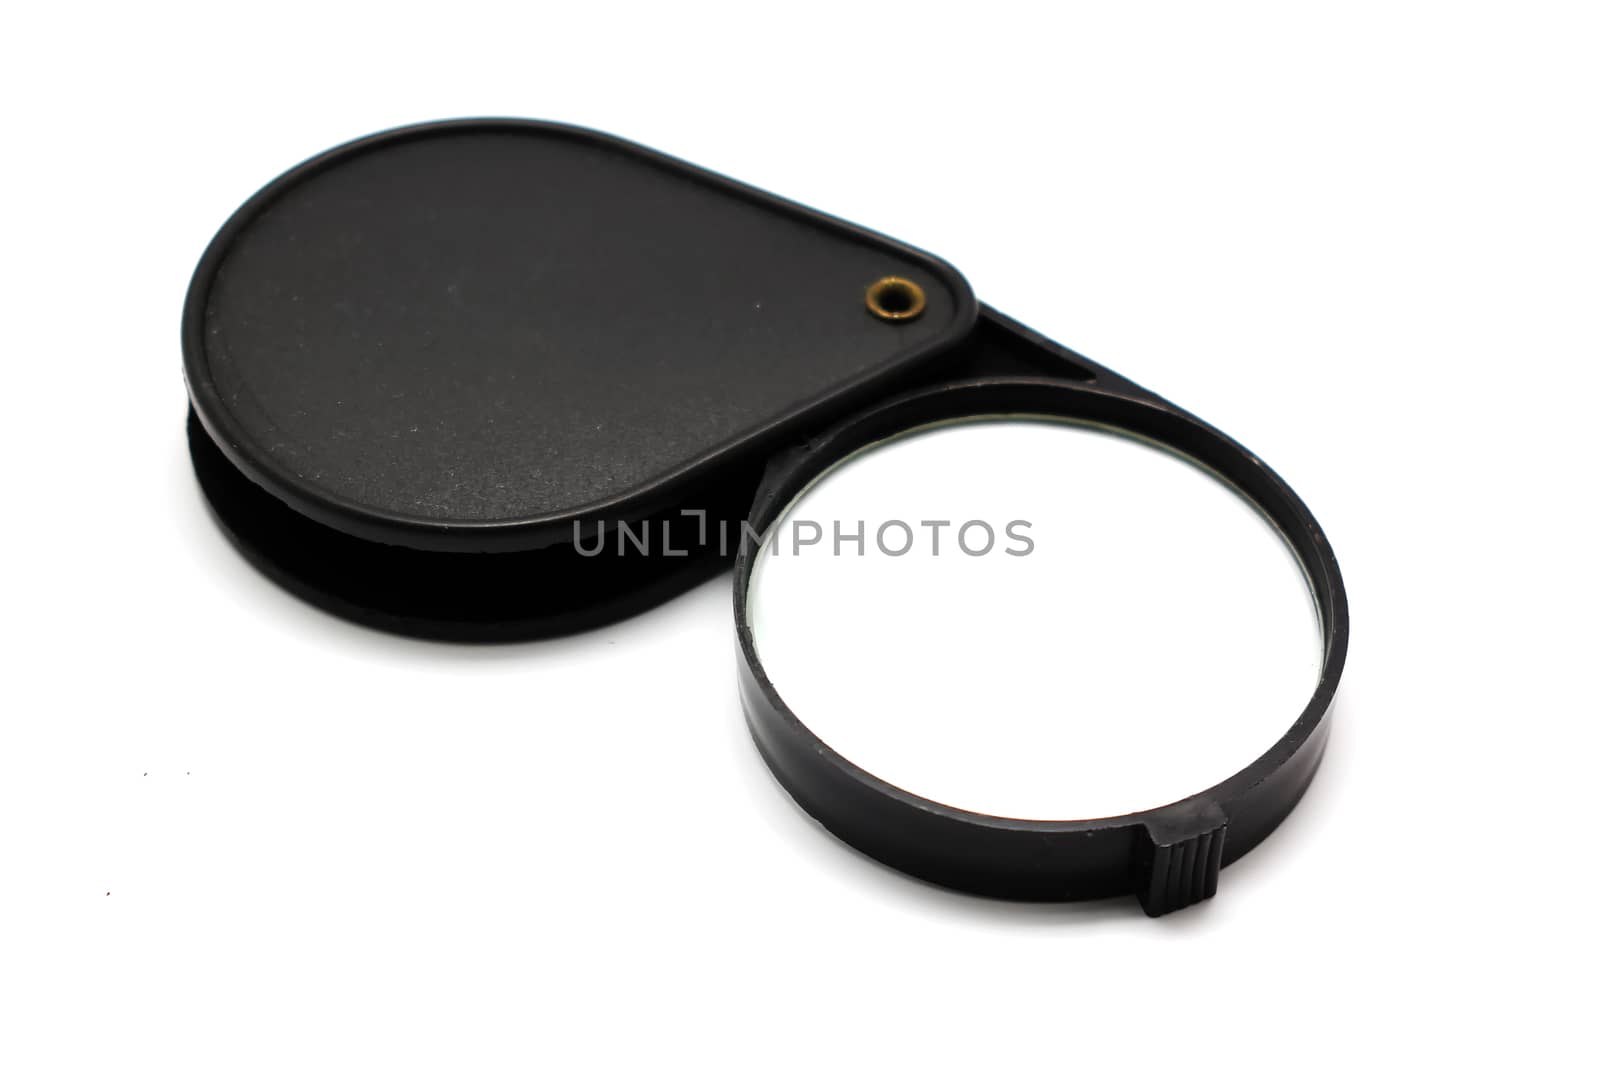 magnifying glass isolated on white by leisuretime70